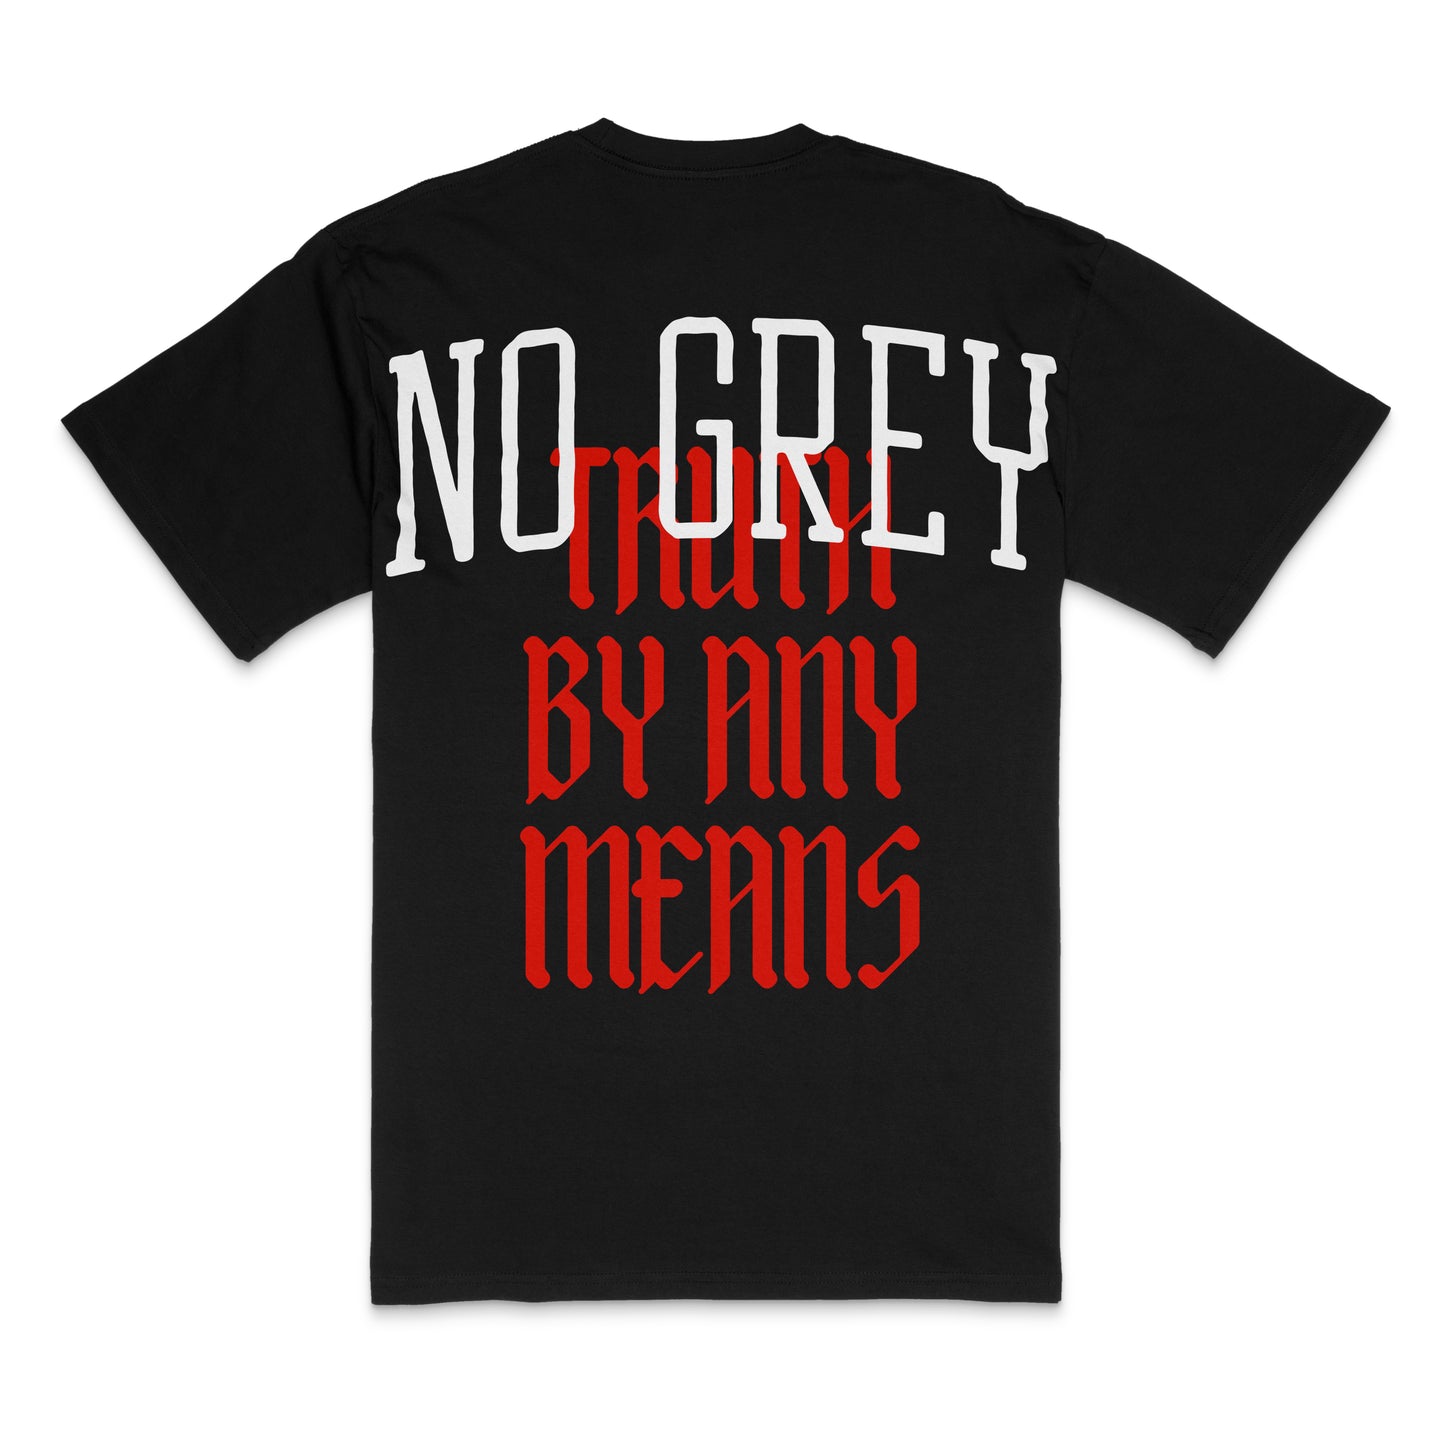 Truth By Any Means: Premium Heavy T-Shirt (Red) (2 Colors)